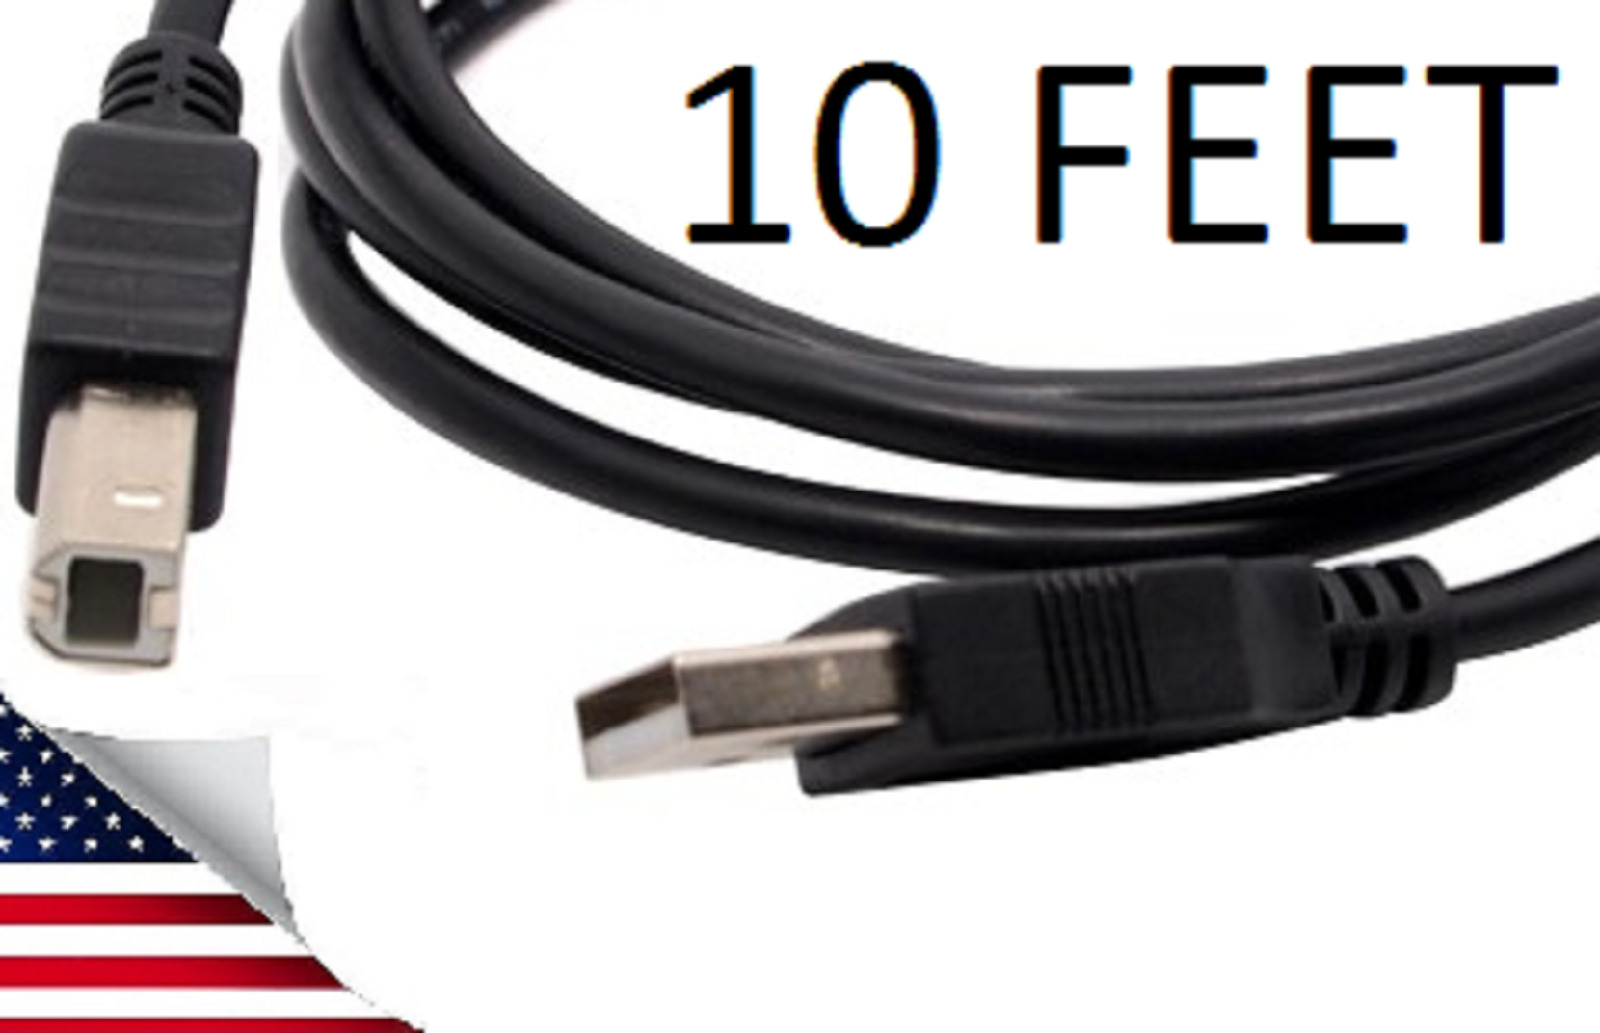 USB PC Data Cord Cable Plug for AOR AR-8200D Wide Range Handheld Receiver Radio